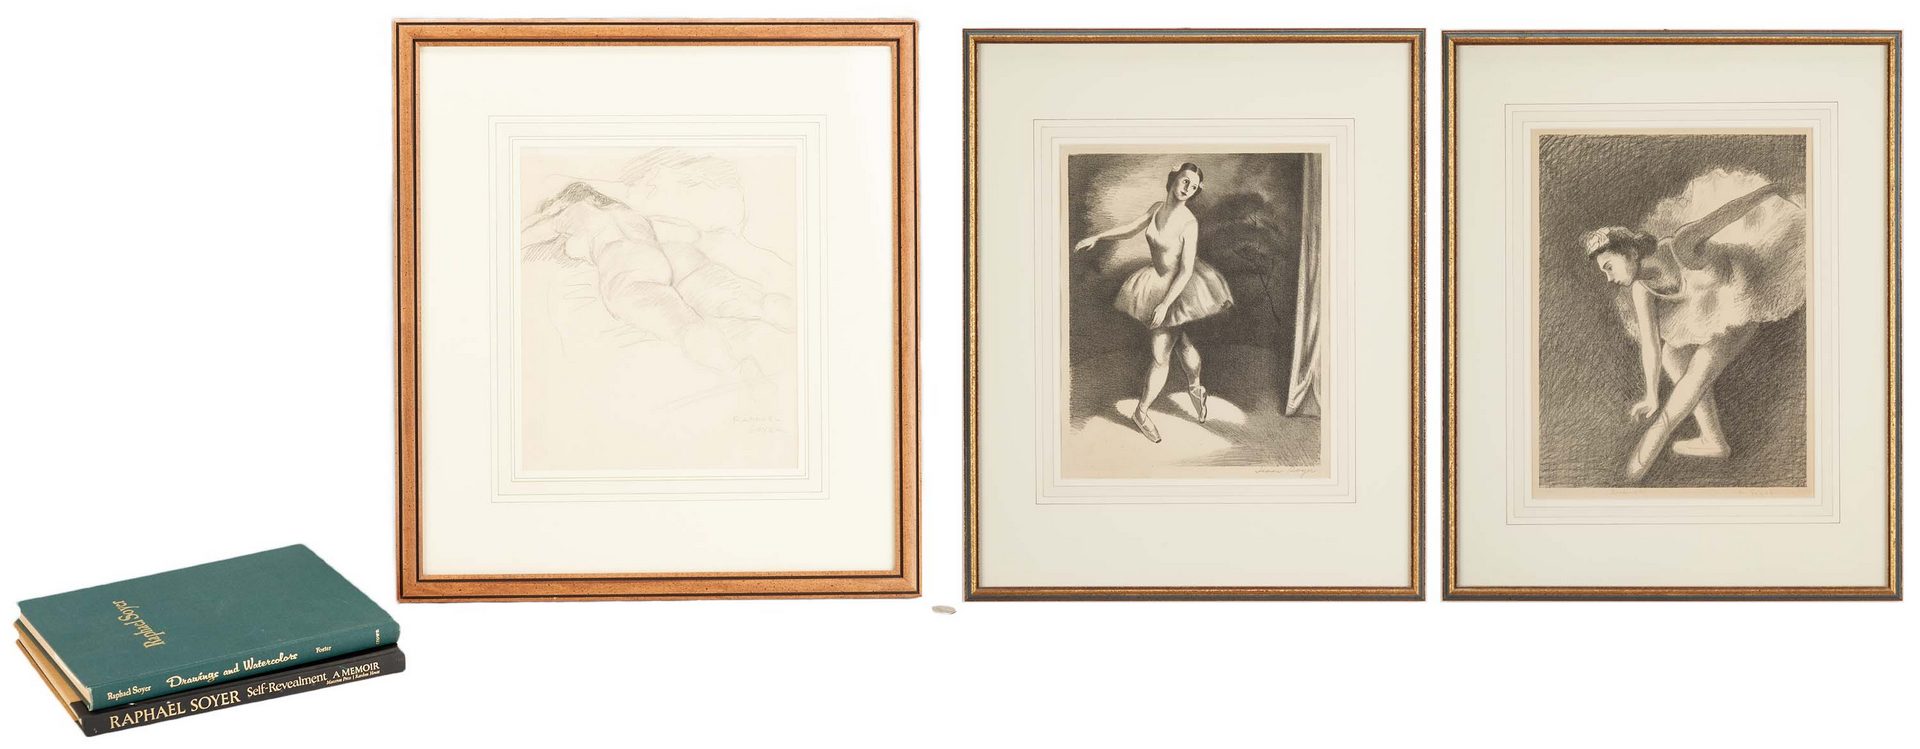 Lot 372: 5 Soyer Family Art Works, incl. R. Soyer Drawing